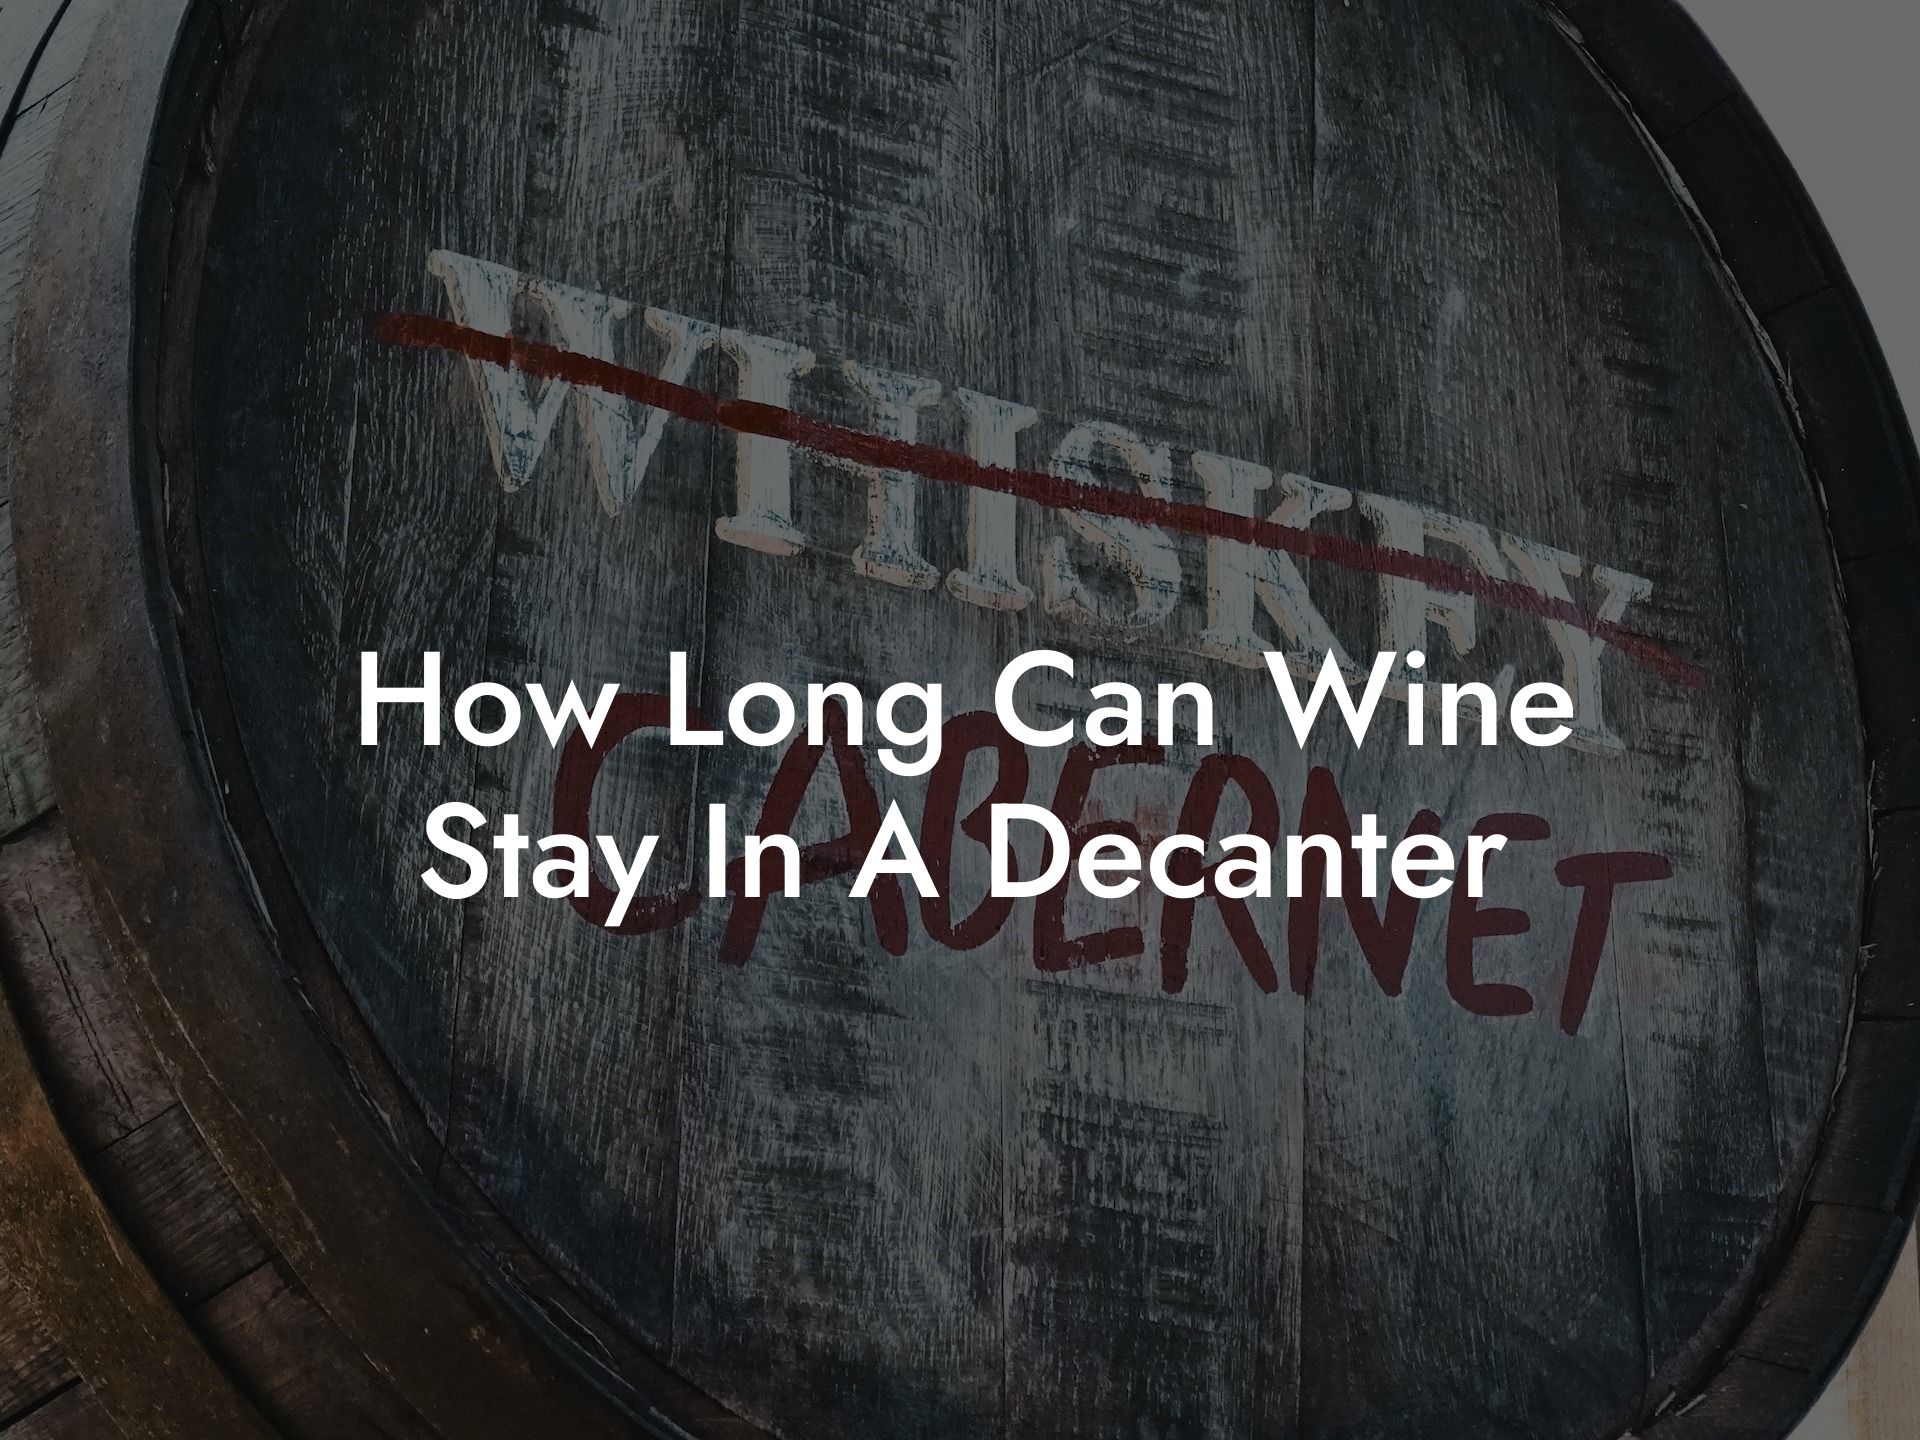 How Long Can Wine Stay In A Decanter